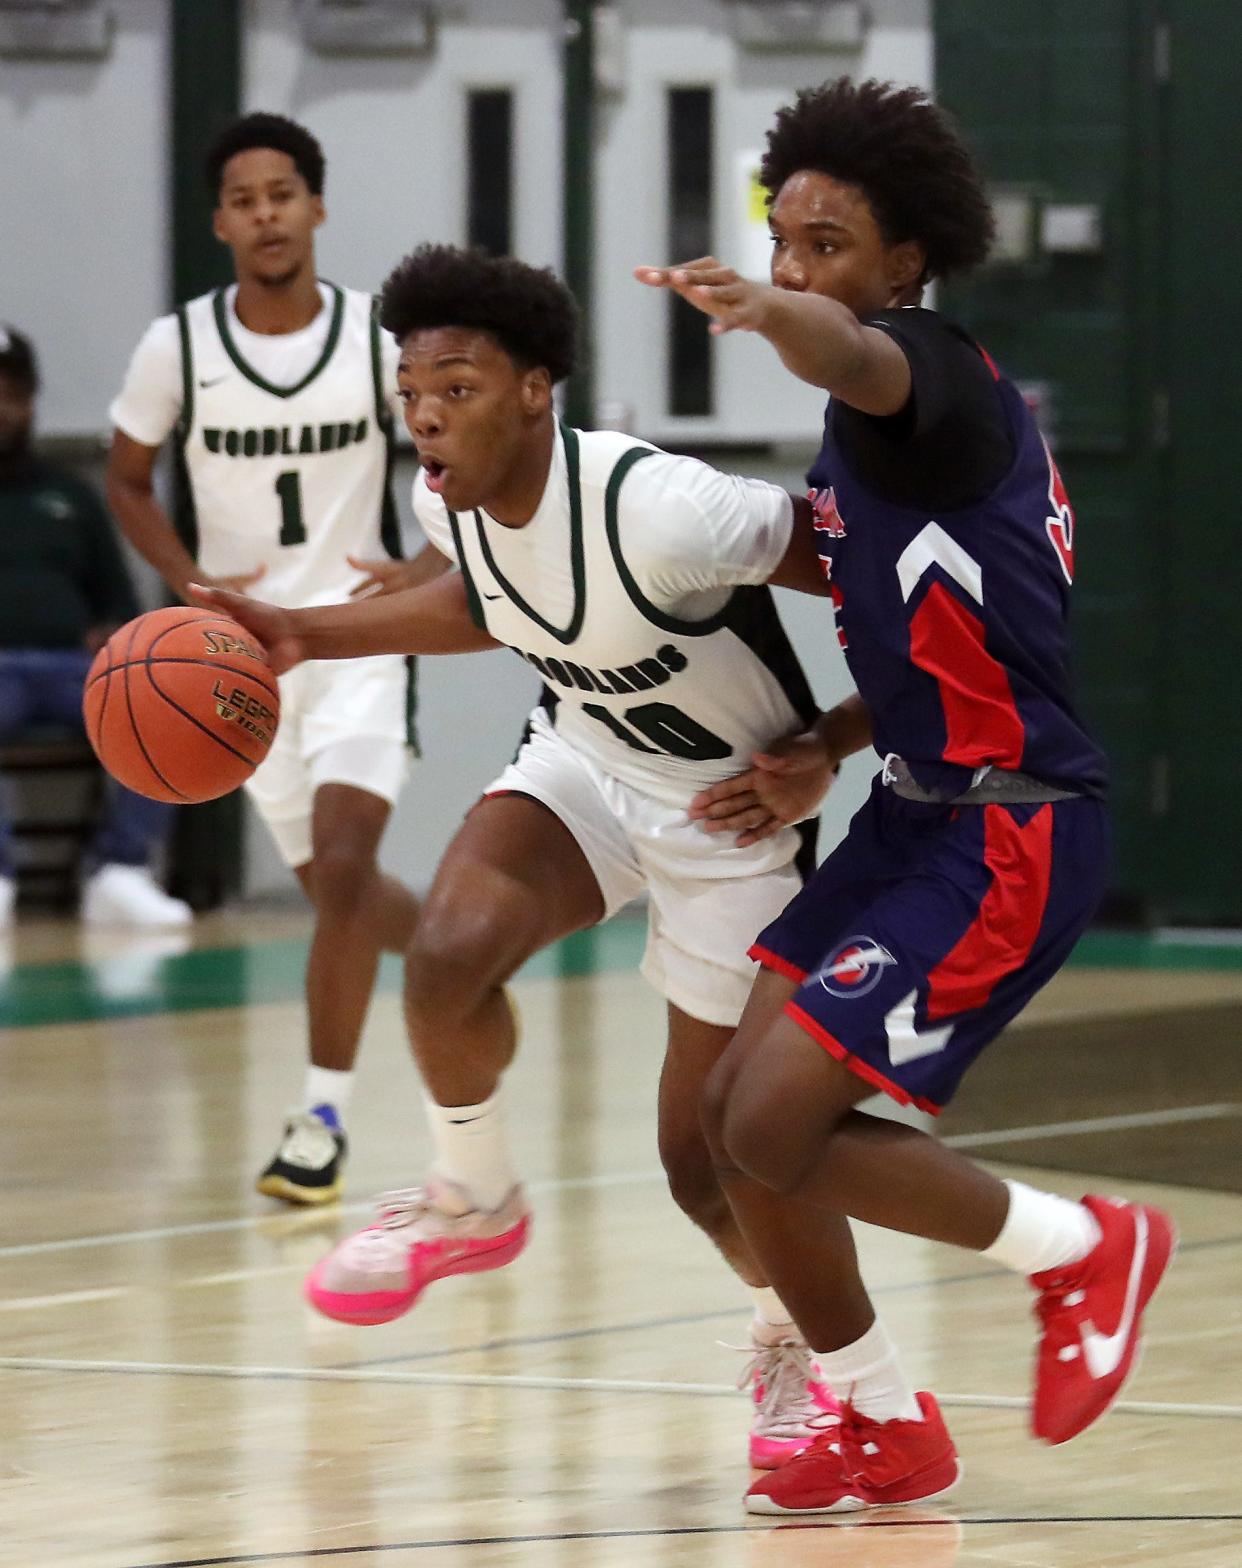 Woodlands’s Eric Woodberry (10) drives to the basket in front of Obama’s Dontaye Dunkle (5) during the inaugural Lower Hudson Valley My Brothers Keeper Basketball Showcase at Woodlands High School in Greenburgh Jan. 10, 2024. Woodlands won the game 56-45.